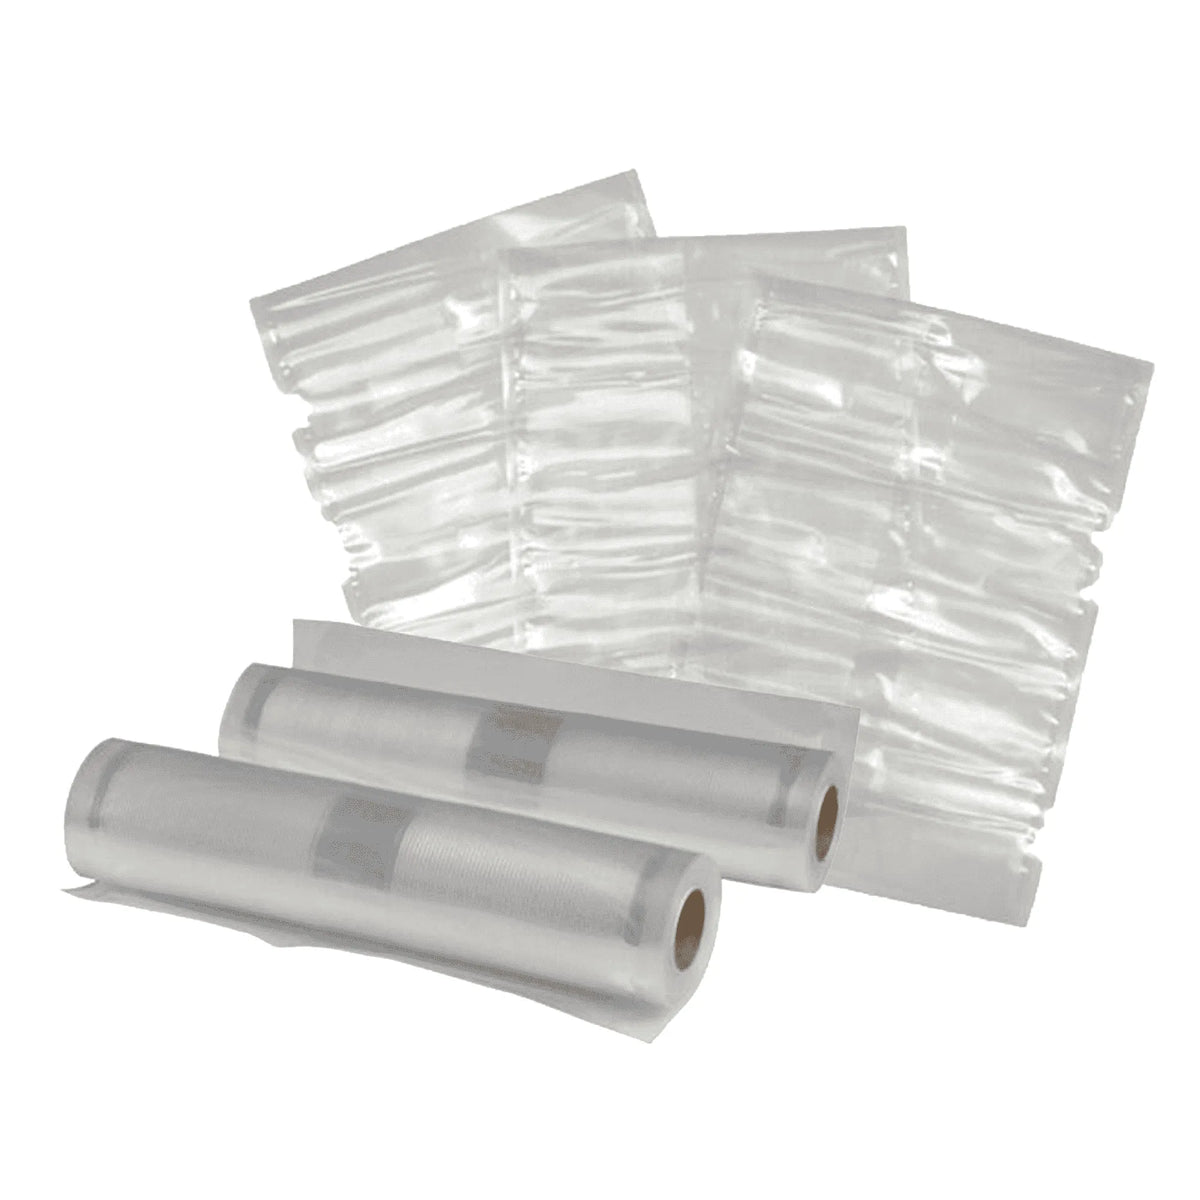 Clear And Black Vacuum Seal Rolls